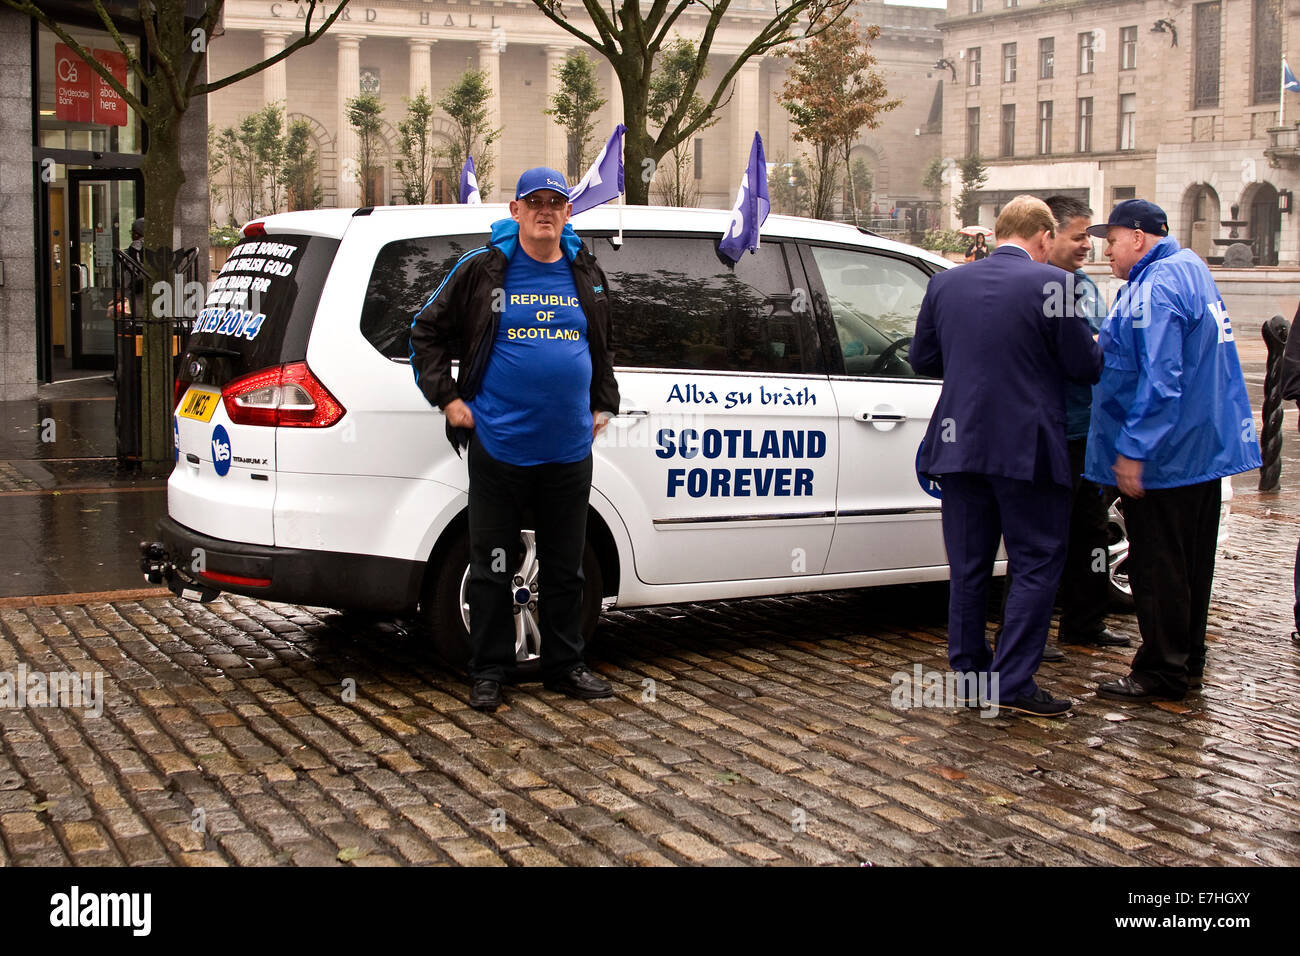 Dundee, Scotland, UK. 18th September, 2014: Scottish Referendum "Vote Yes" Campaign. Scottish National Party Political Campaigners and voters in Dundee city centre encouraging Scottish People to vote Yes for Independence today September 18th 2014. Credit:  Dundee Photographics / Alamy Live News Stock Photo